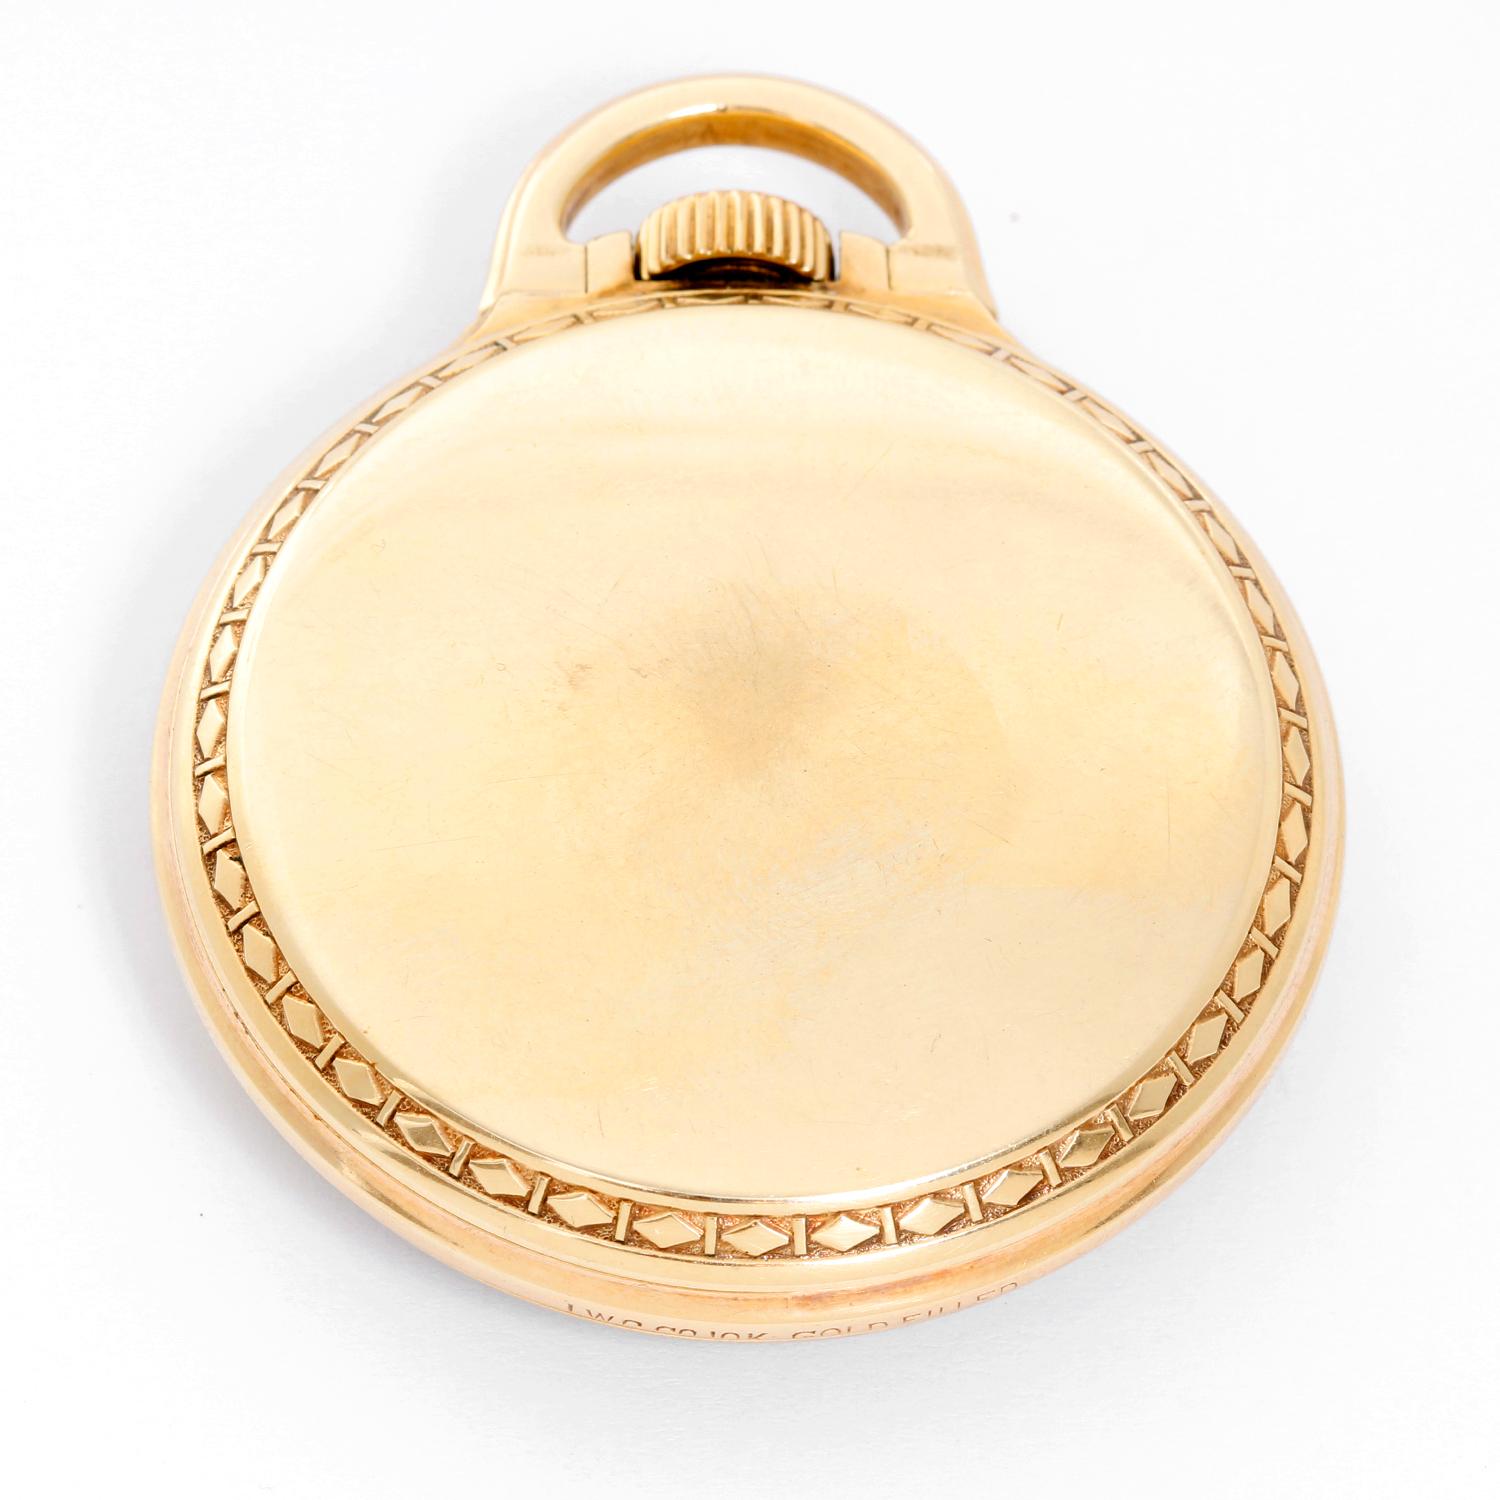 Elgin  BW Raymond Gold Filled Pocket Watch - Manual winding; 21 jewels. Gold filled . White enamel single sunk dial with Arabic numerals . Pre-owned with custom box. Railroad approved. 